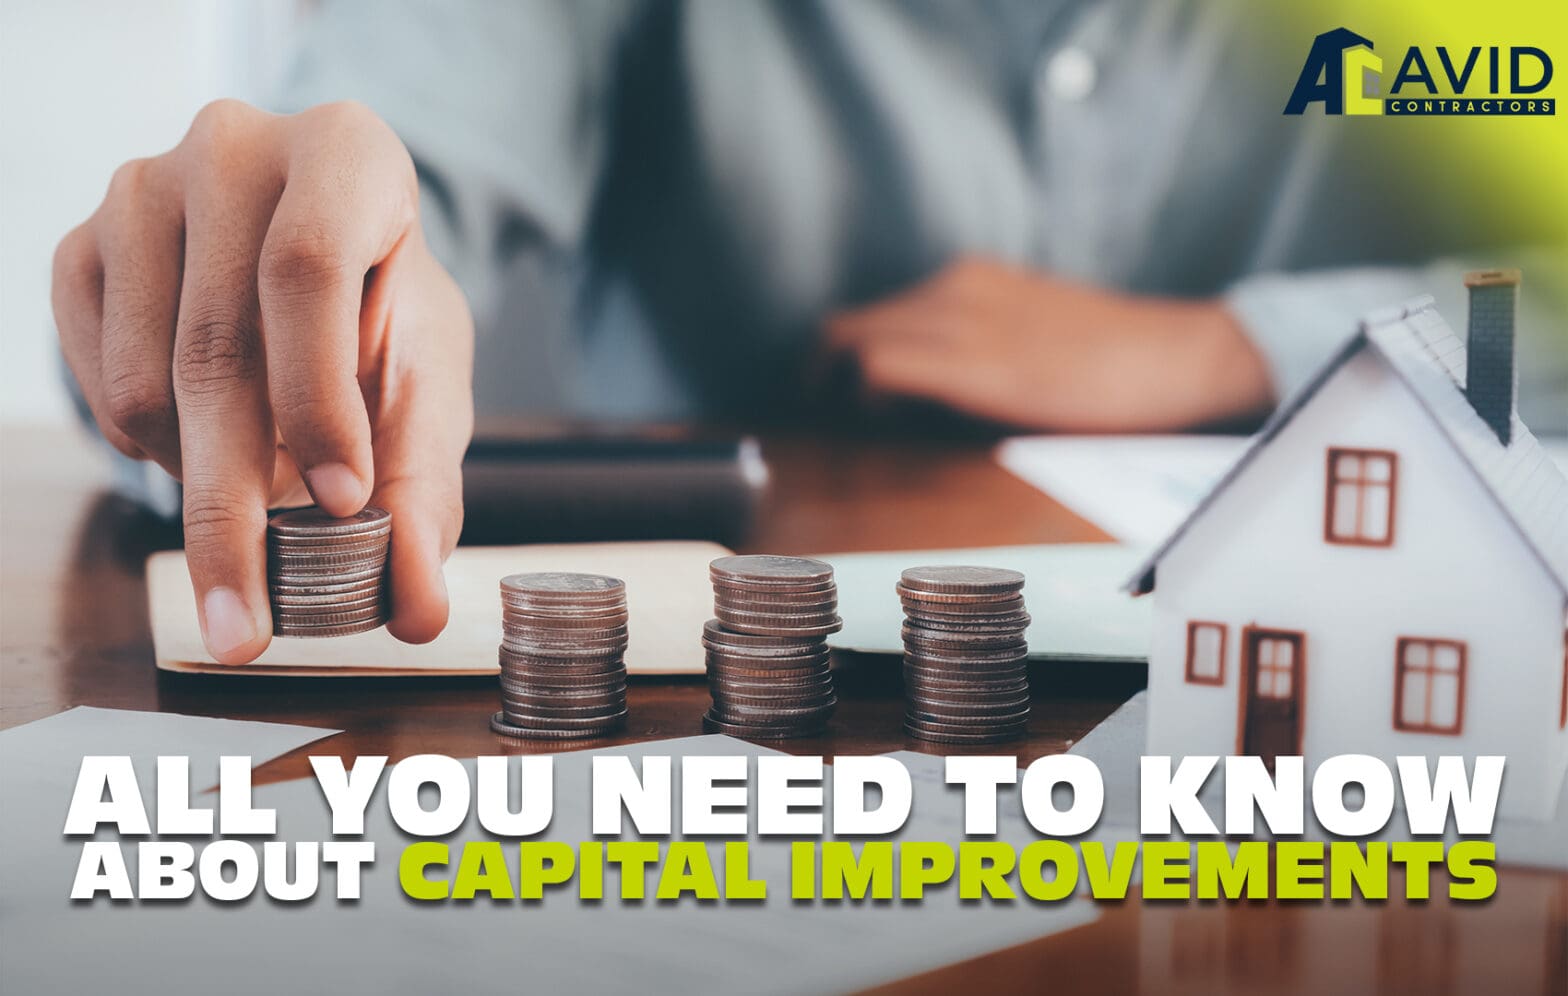 All You Need to Know About Capital Improvements